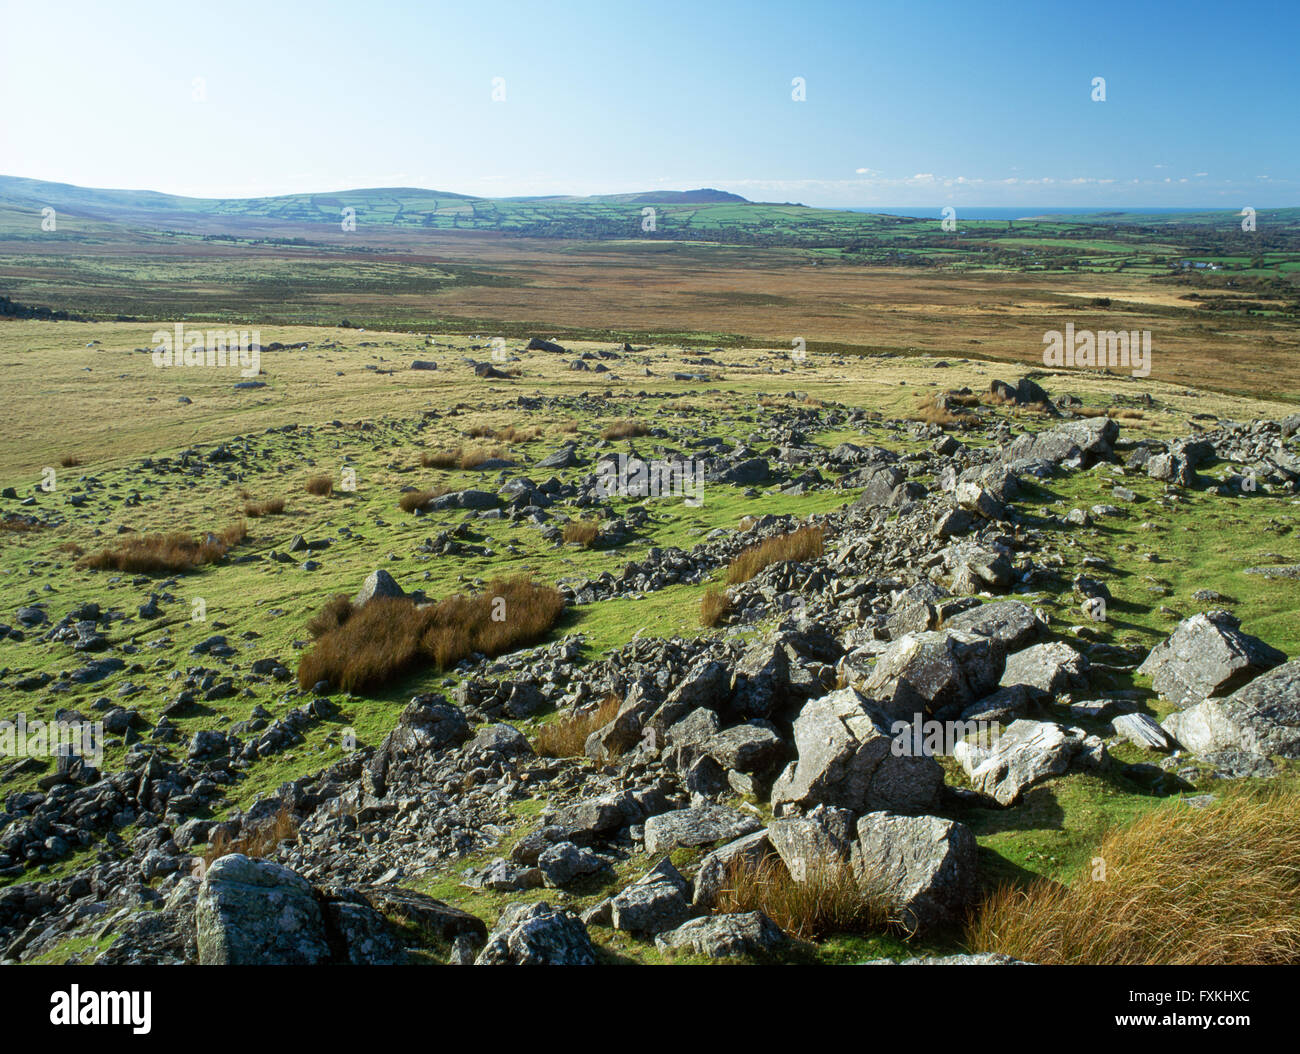 Stone-faced bank and chevaux-de-frise defences on the W side of Carn Alw Iron Age hillfort on a rocky outcrop on Mynydd Preseli, Pembrokeshire. Stock Photo